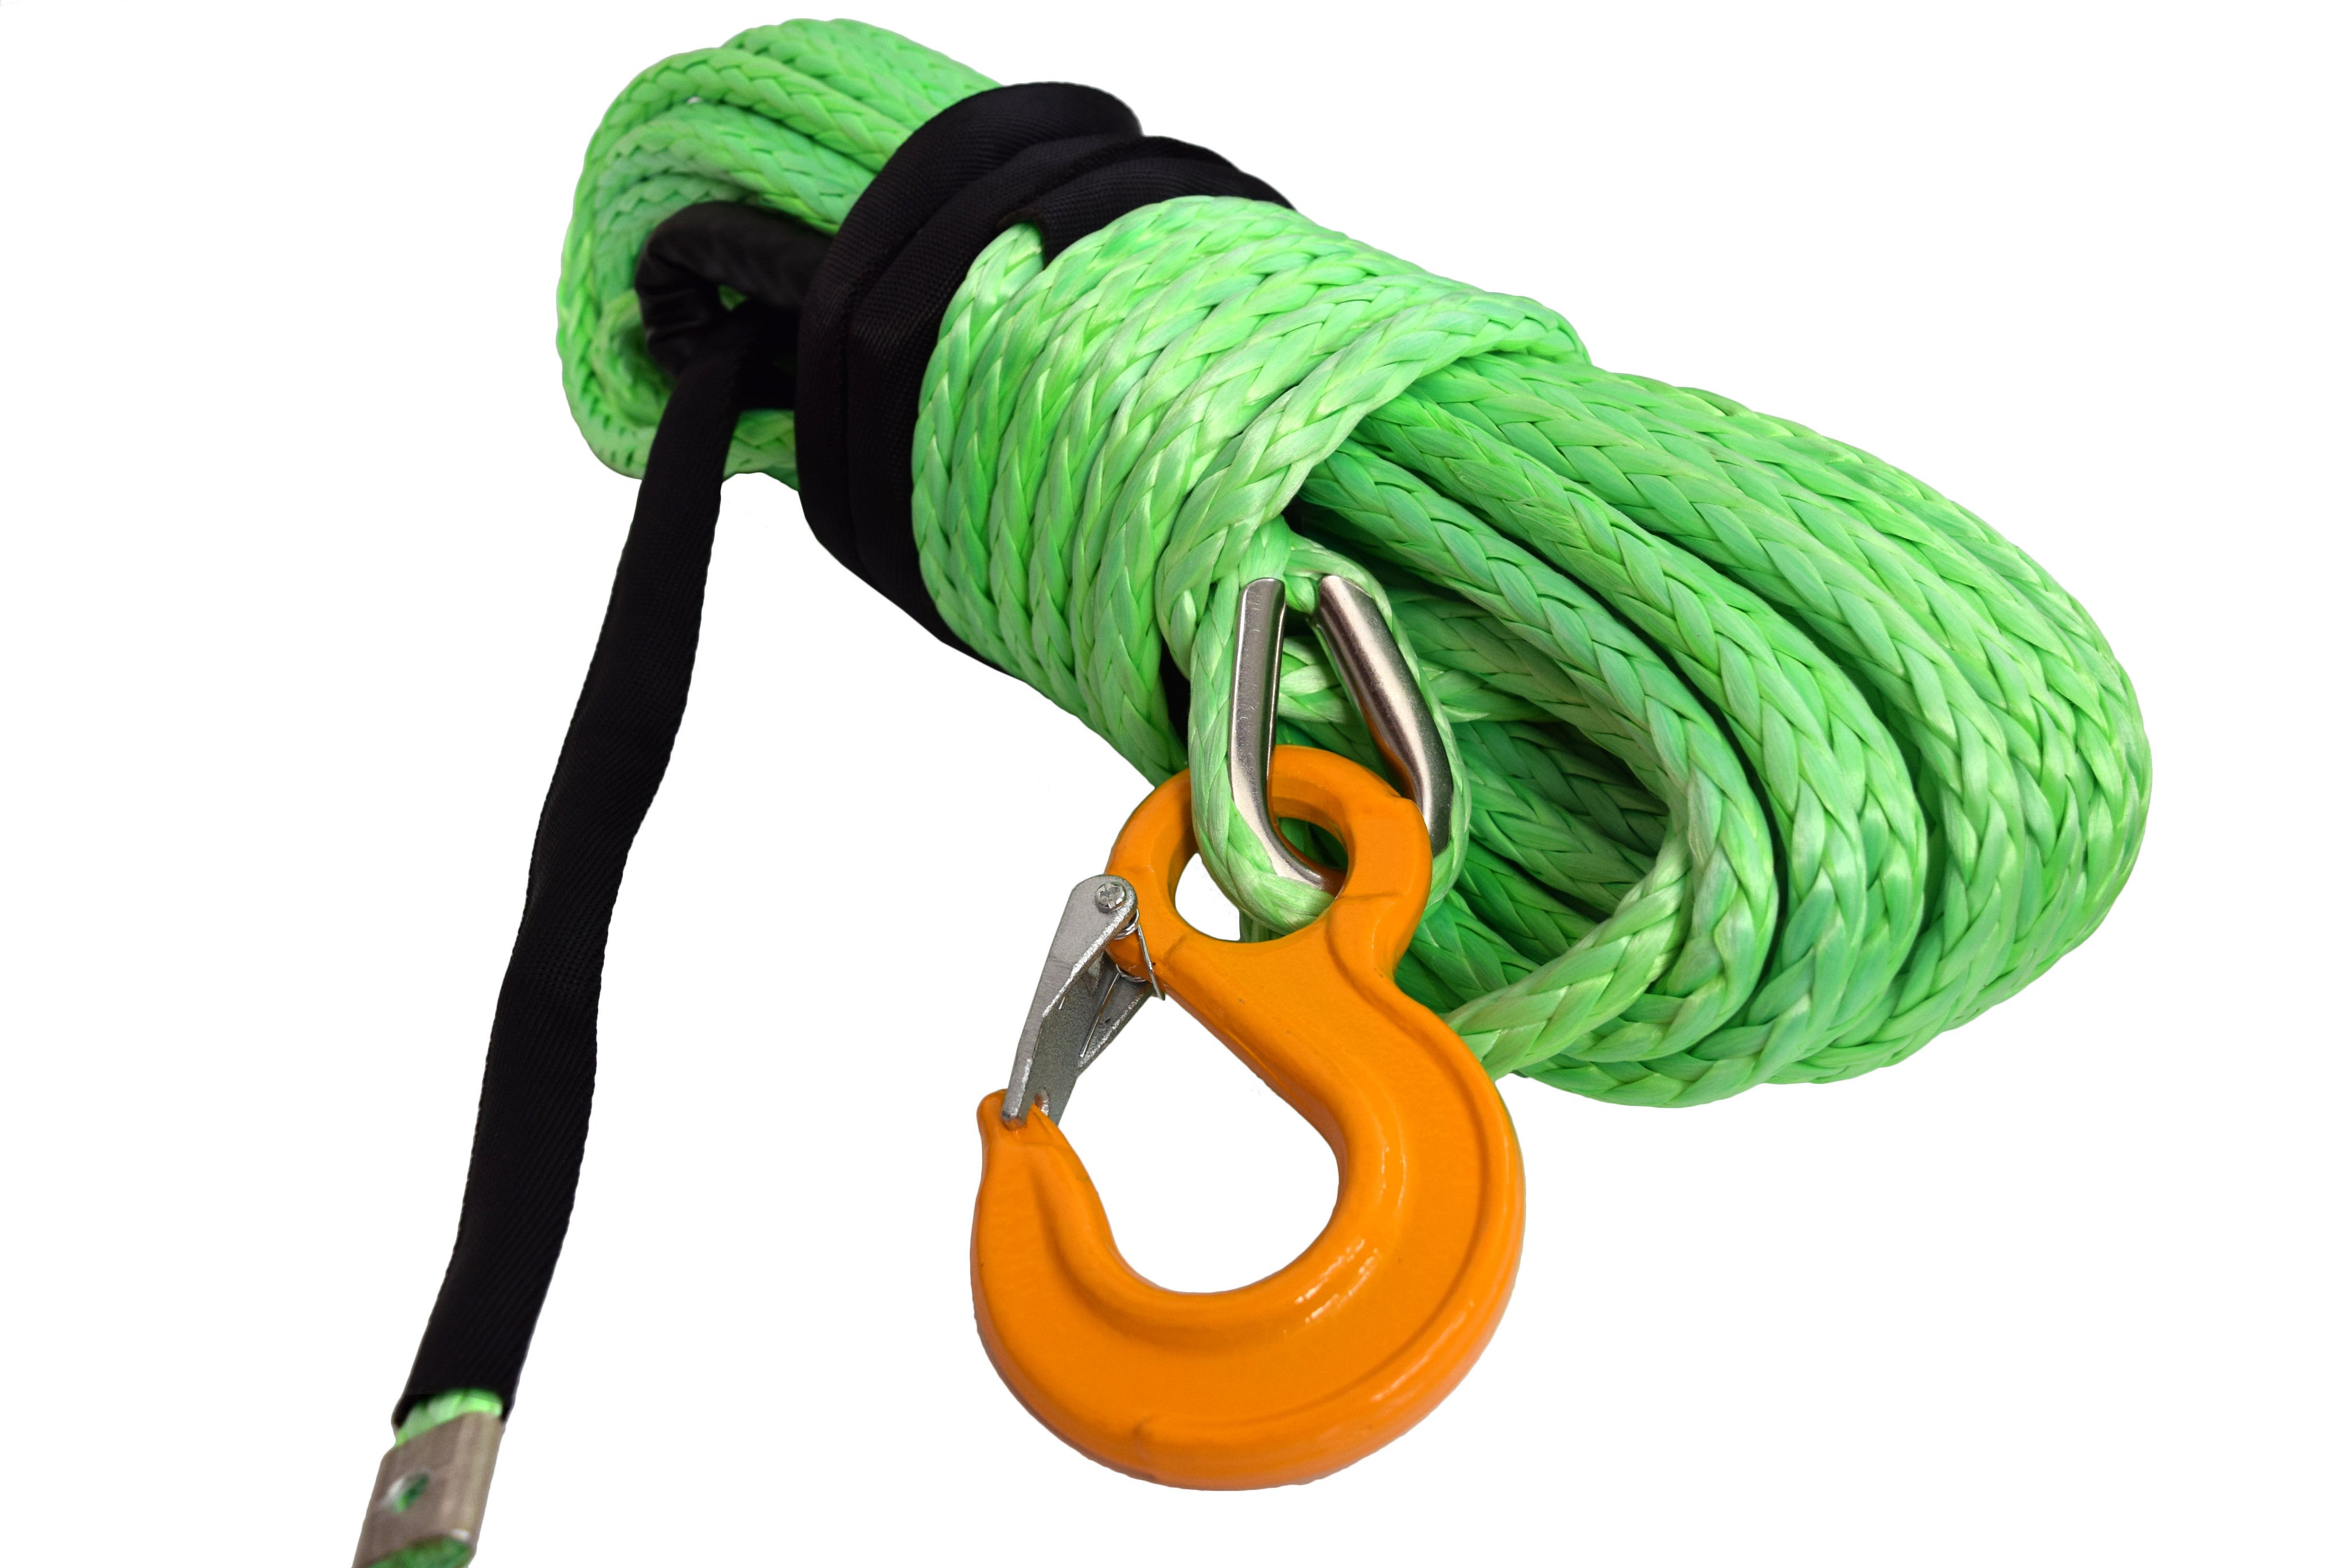 QIQU green 100 ft 1/2 inch SUV Off-road car synthetic winch cable rope line with hook and lug